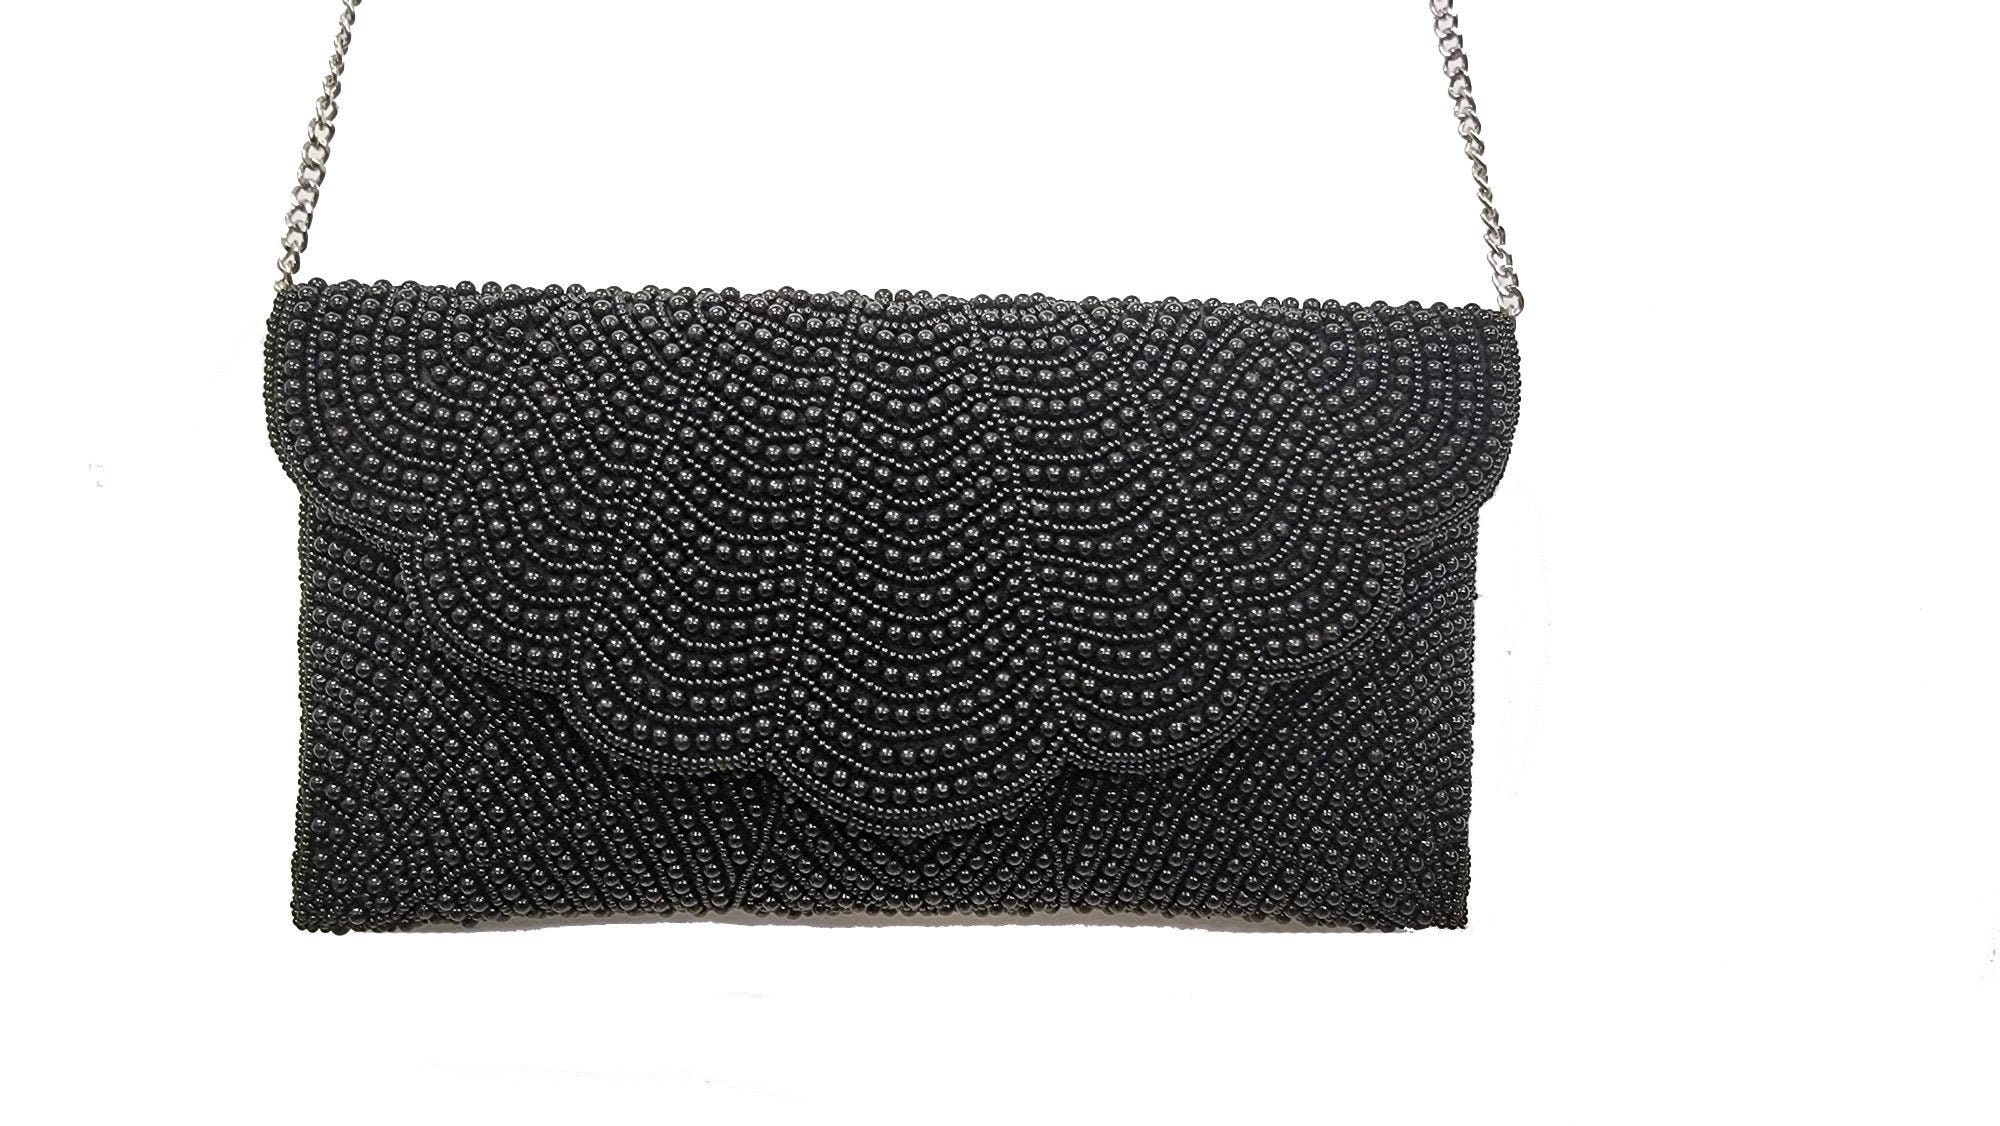 Women's Beaded Clutch and Crossbody Accessories (Generic) - Black Multi, Size O/S by Venus